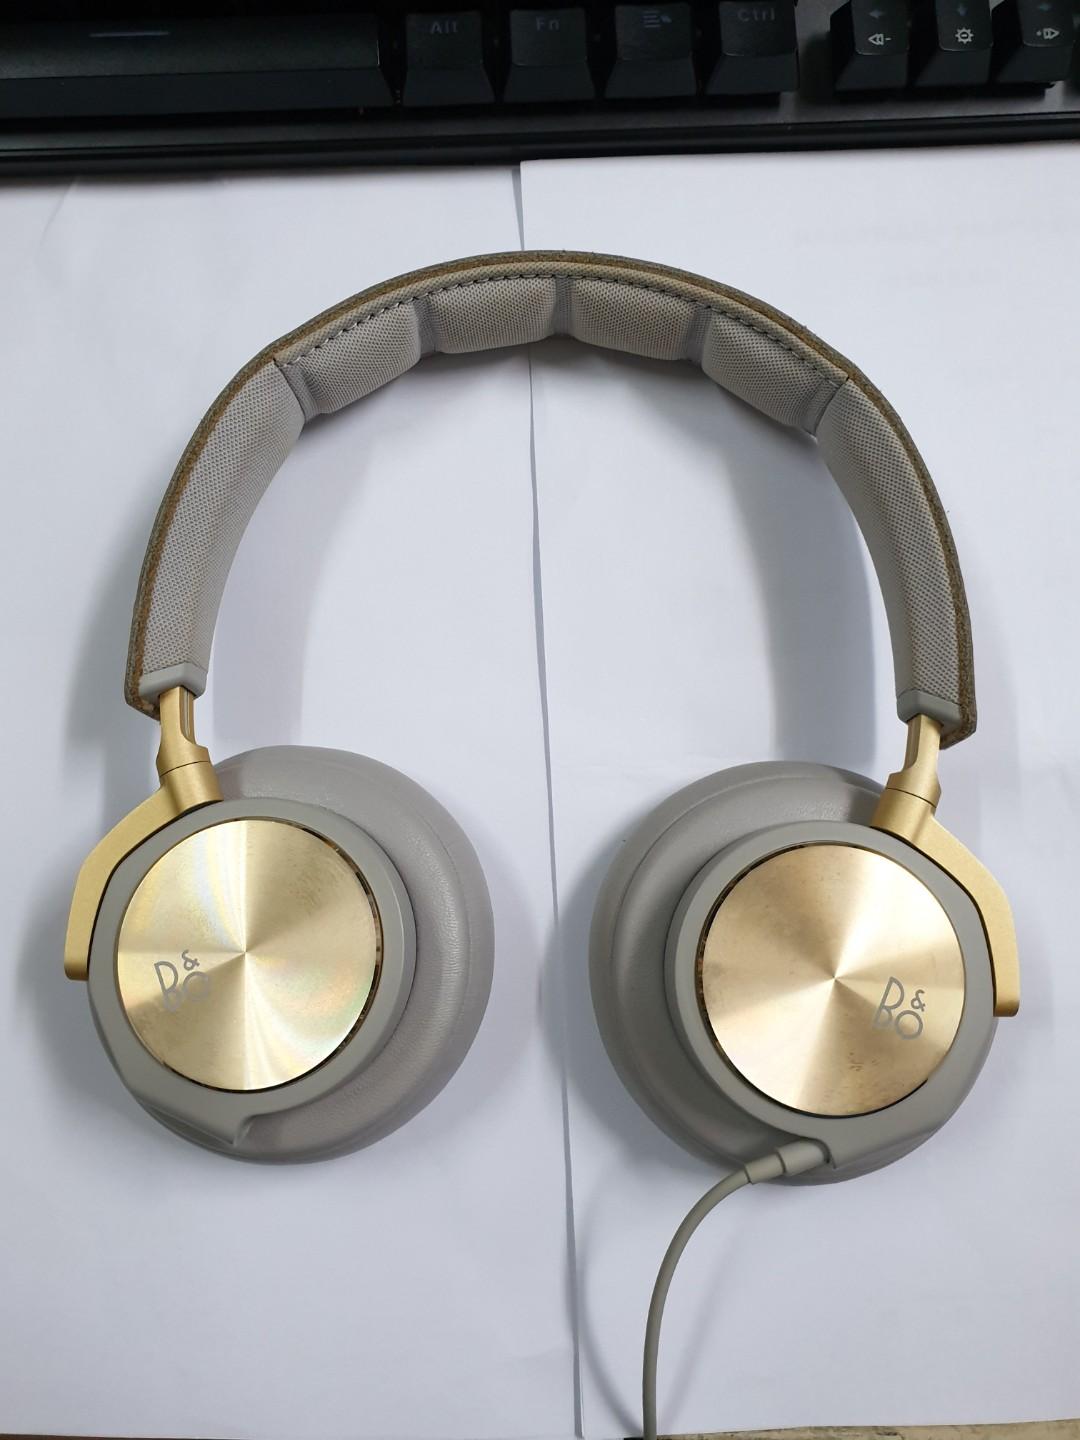 B&O & Olufsen Beoplay H6 (2nd Gen) - Champagne Grey, Hobbies & Music & Media, Music Accessories on Carousell